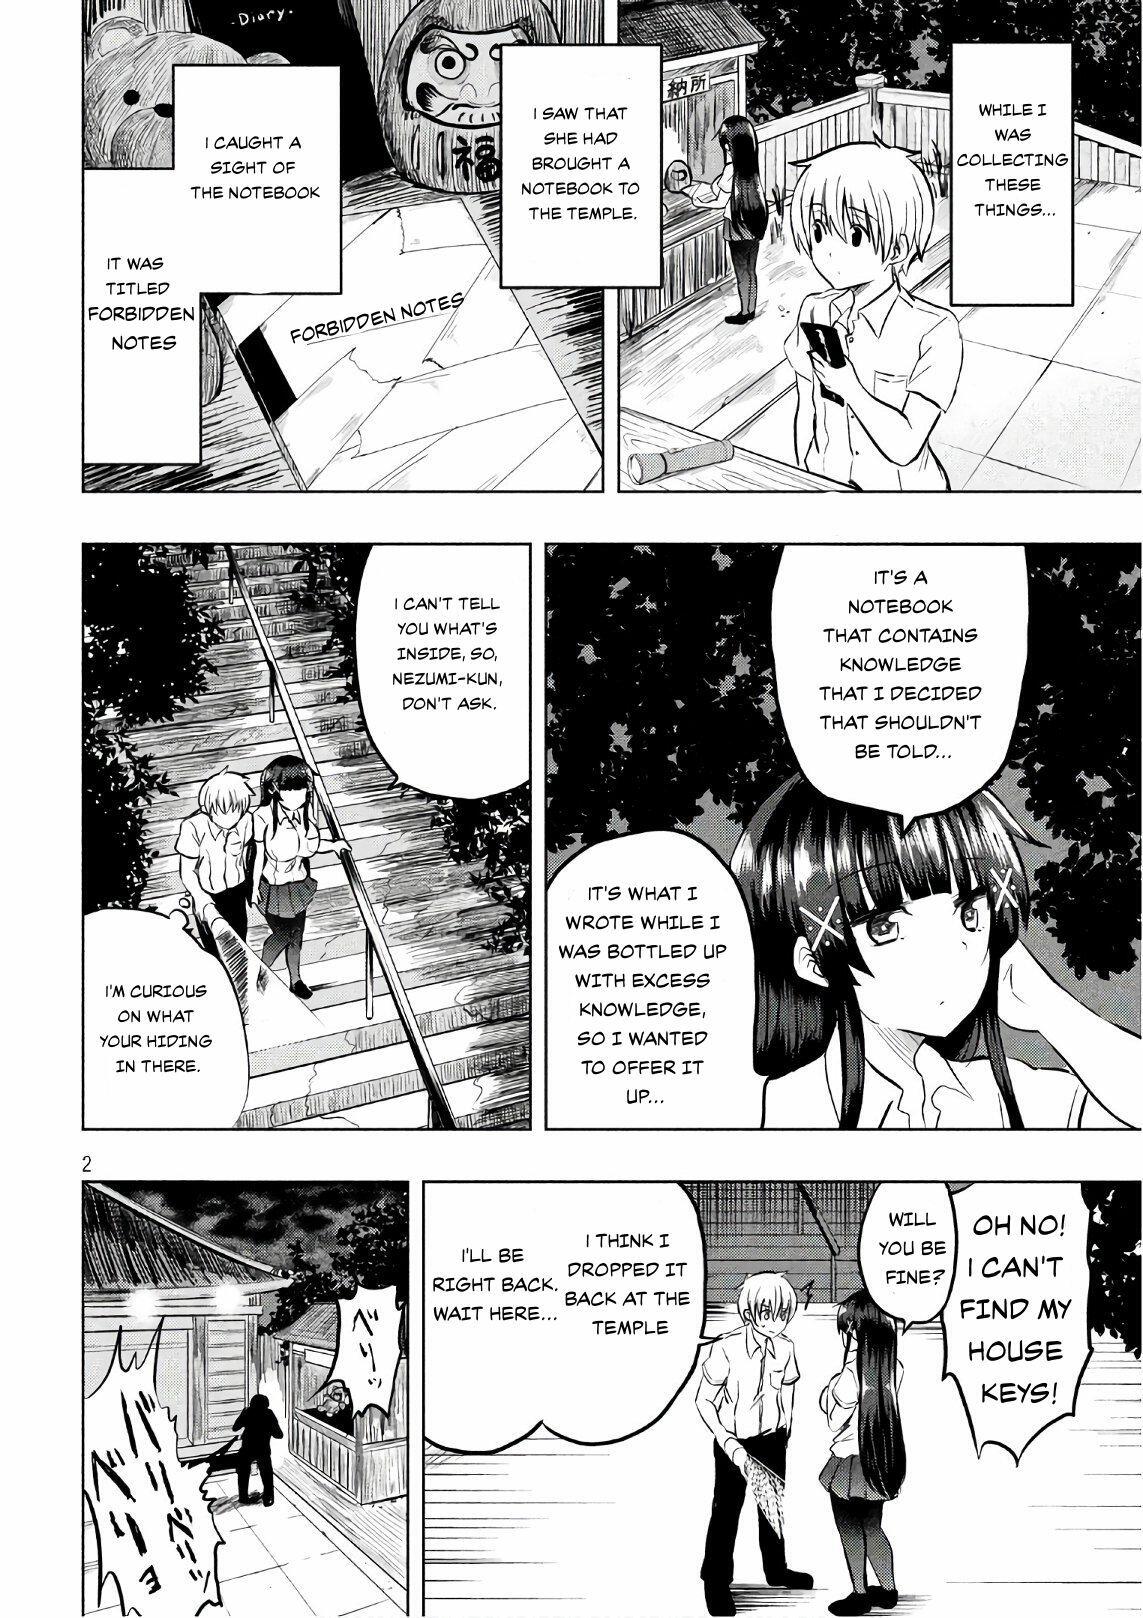 A Girl Who Is Very Well-Informed About Weird Knowledge, Takayukashiki Souko-San Chapter 26: Test Of Courage page 2 - Mangakakalots.com